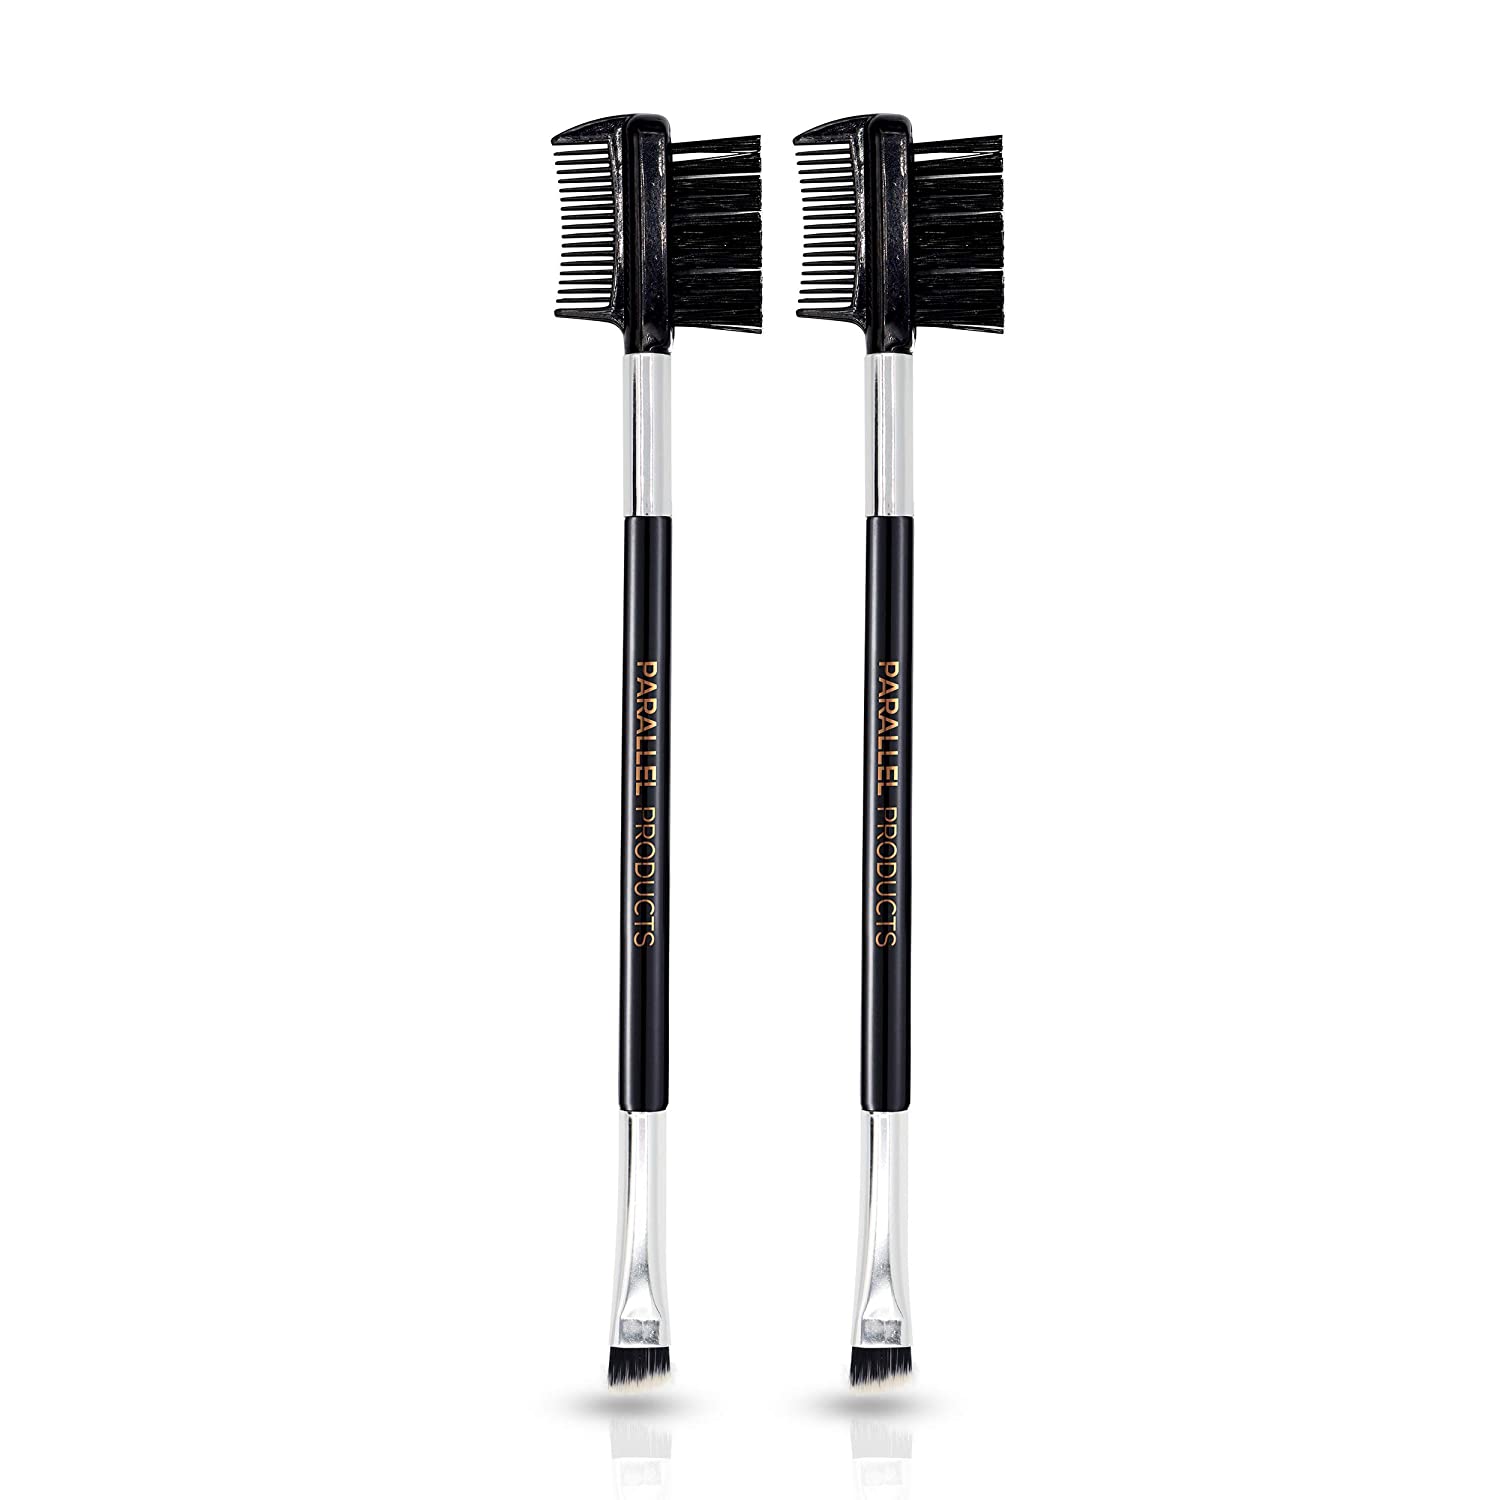 Parallel Products The Brash Brush Premium Brow and Lash Makeup Brush 2 Pack Side by Side